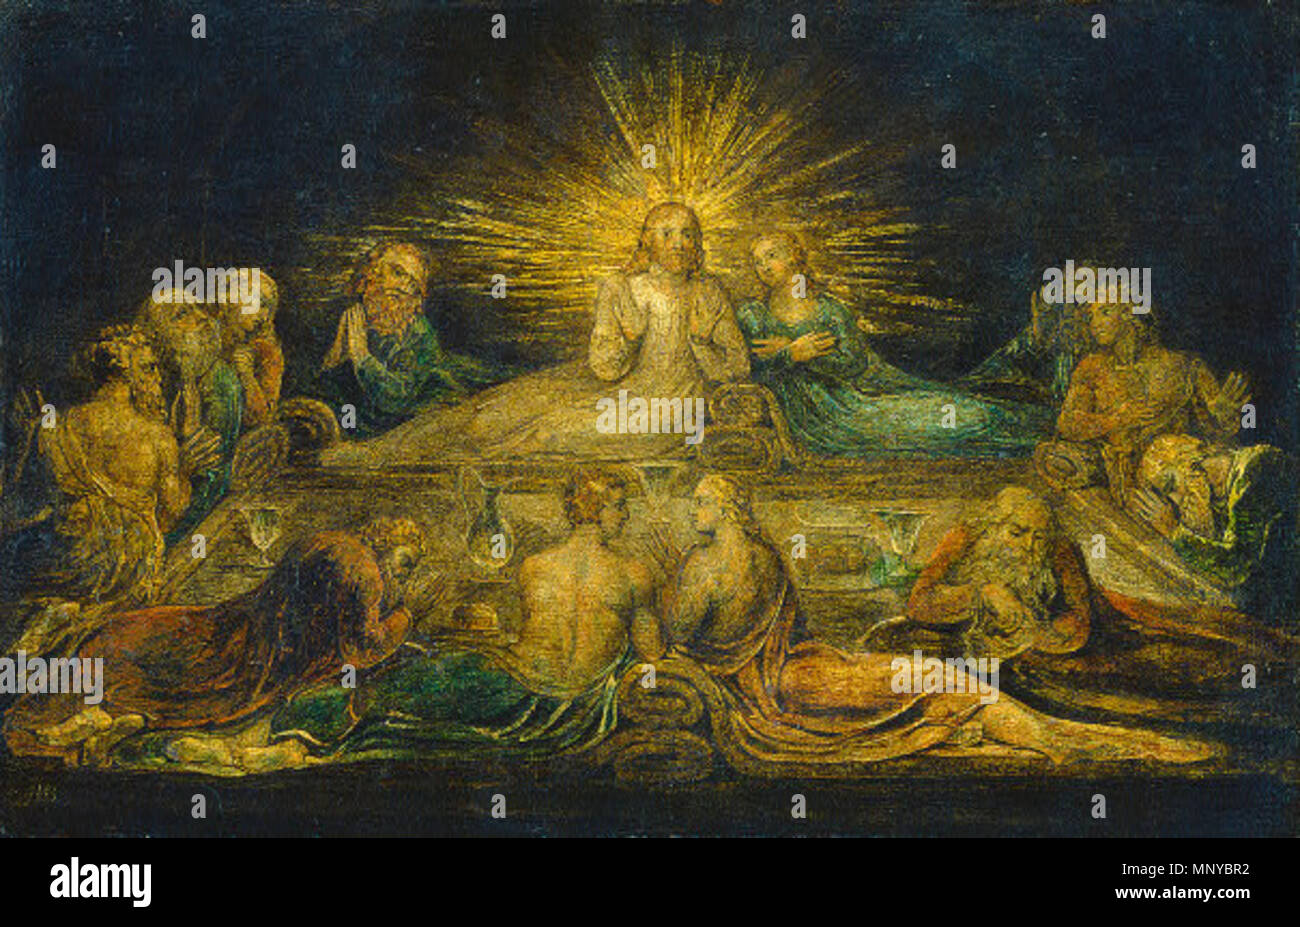 . English: William Blake The Last Supper 1799 tempera on canvas overall: 30.5 x 48.2 cm (12 x 19 in.) framed: 38.1 x 55.3 x 3.8 cm (15 x 21 3/4 x 1 1/2 in.) Rosenwald Collection 1954.13.1 Not on View . 2 April 2013, 17:50:39.   William Blake  (1757–1827)       Alternative names W. Blake; Uil'iam Bleik  Description British painter, poet,, writer, theologian, collector and engraver  Date of birth/death 28 November 1757 12 August 1827  Location of birth/death Broadwick Street Charing Cross  Work location London  Authority control  : Q41513 VIAF: 54144439 ISNI: 0000 0001 2096 135X ULAN: 500012489  Stock Photo